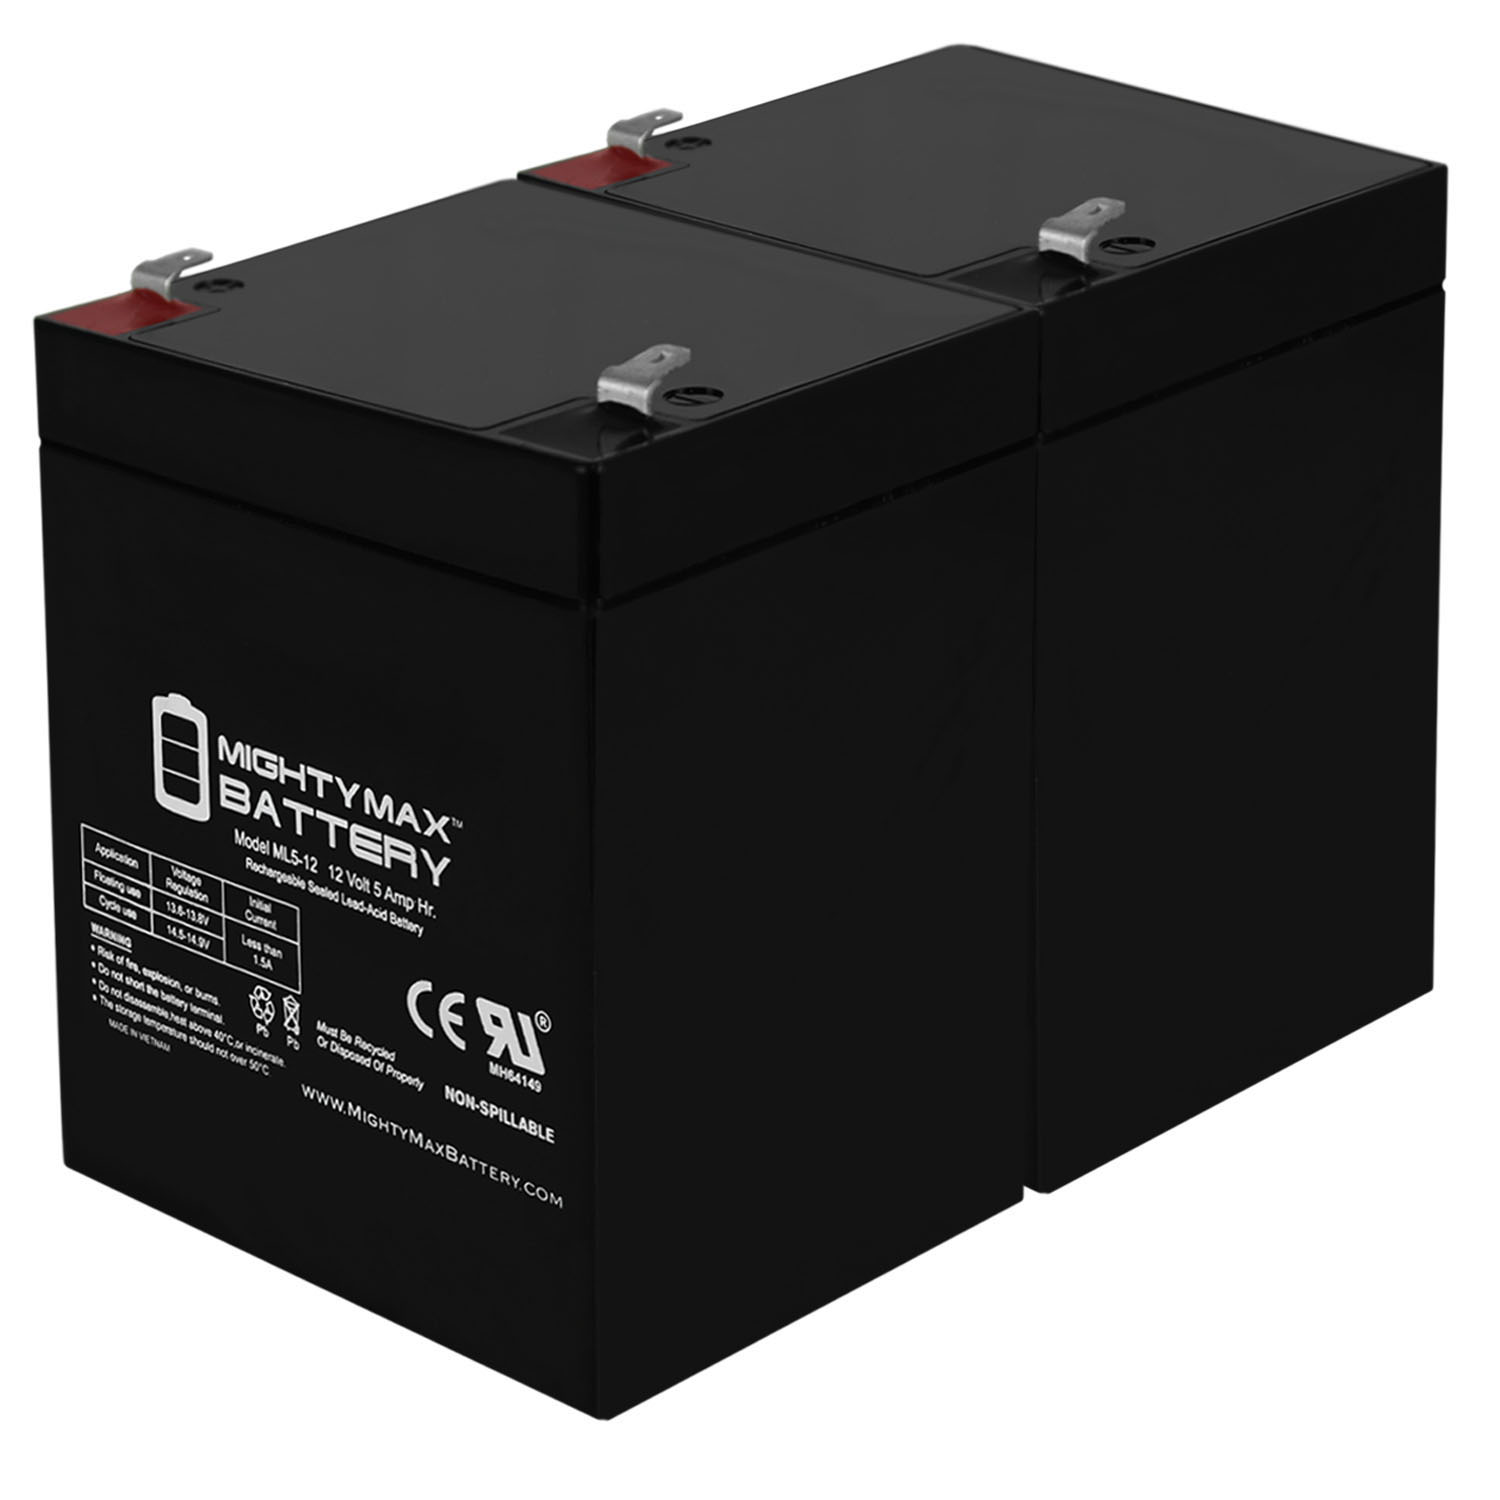 12V 5AH SLA Replacement Battery for Hawker Cyclon 0809-0016 - 2 Pack